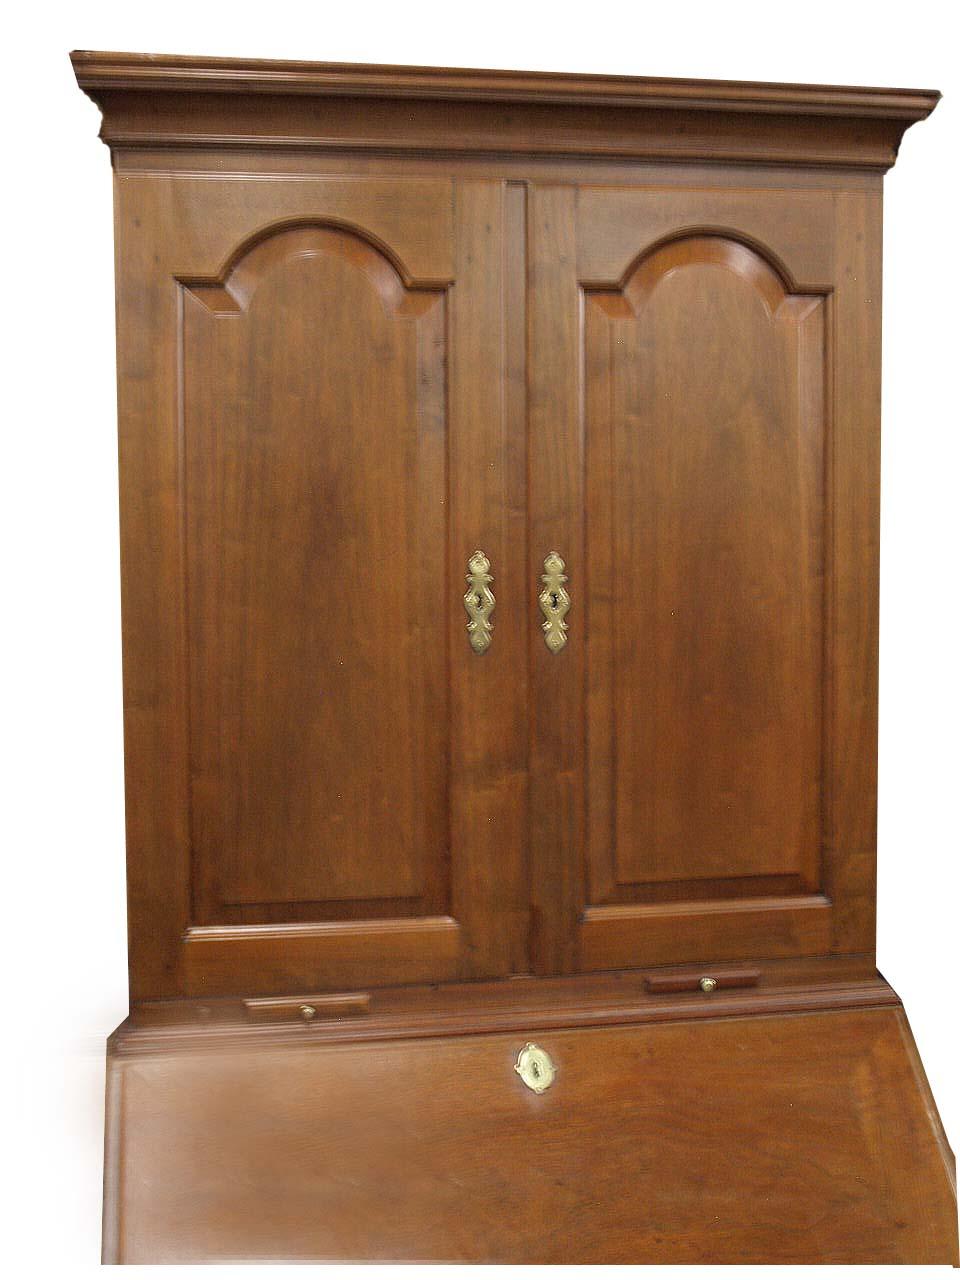 English walnut secretary, the top with cove cornice above double ''tombstone''raised panel doors and pull out candle slides; the fitted interior with adjustable shelves, cubby holes and three drawers; the desk with beautiful figured walnut fall